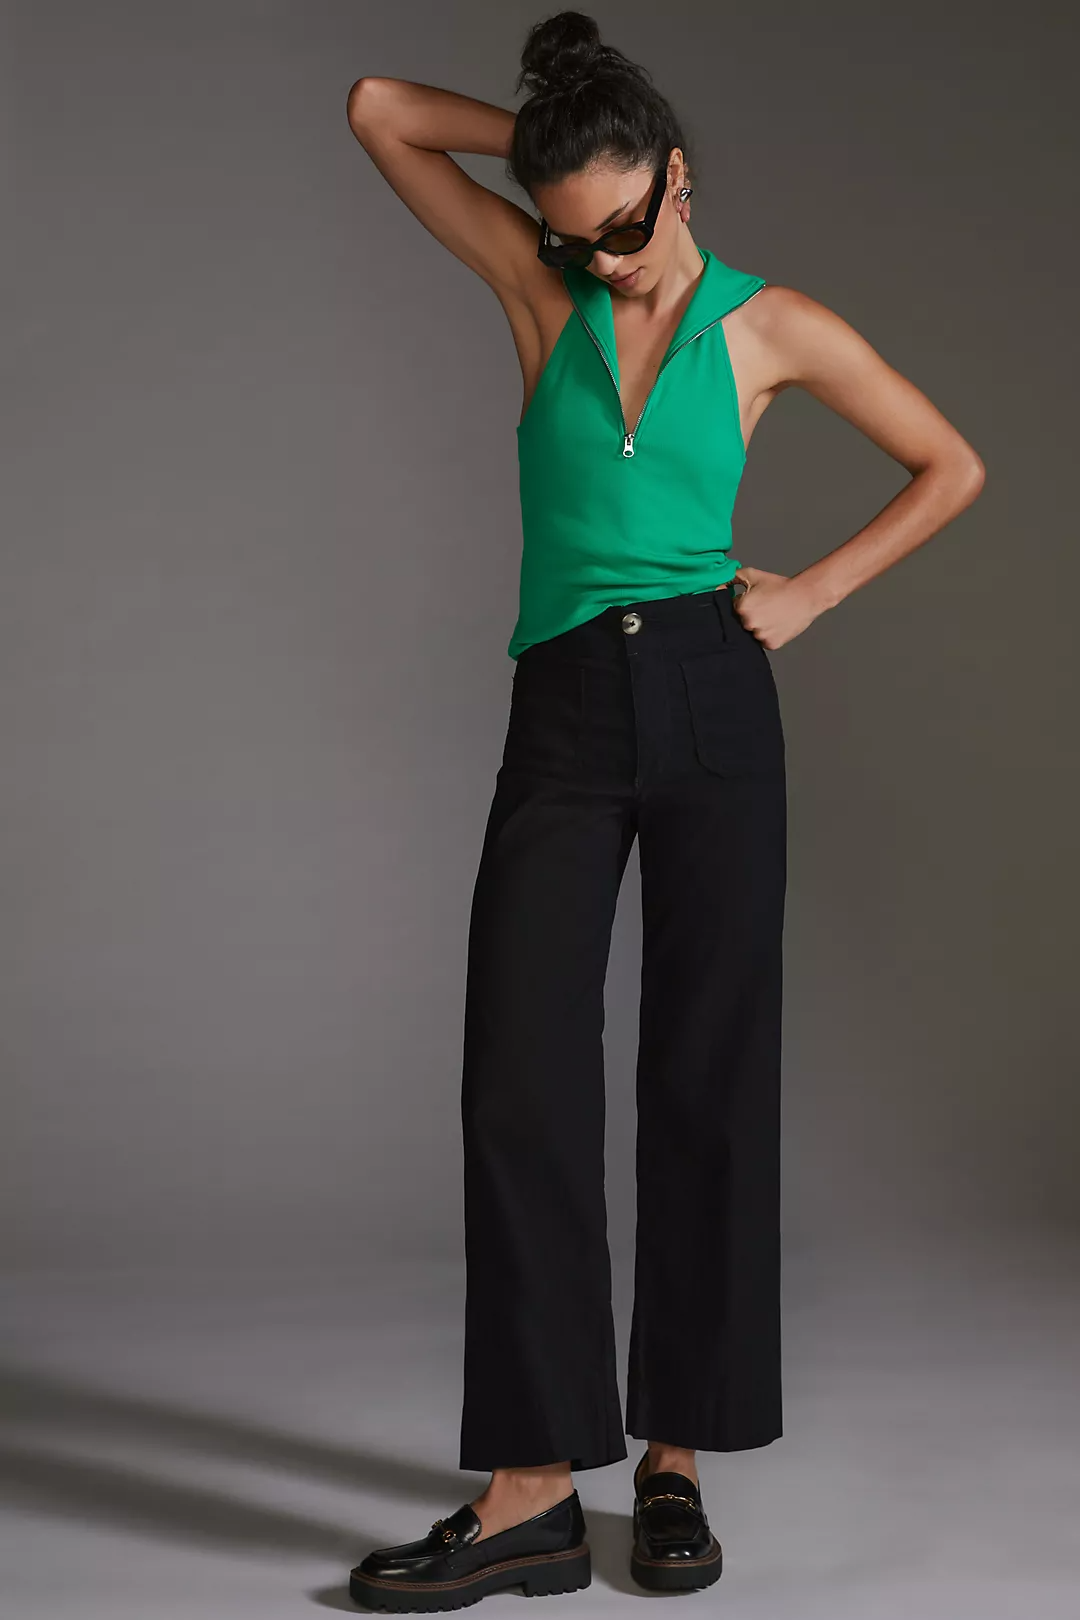 The Best Black Pants to Invest In - Venti Fashion